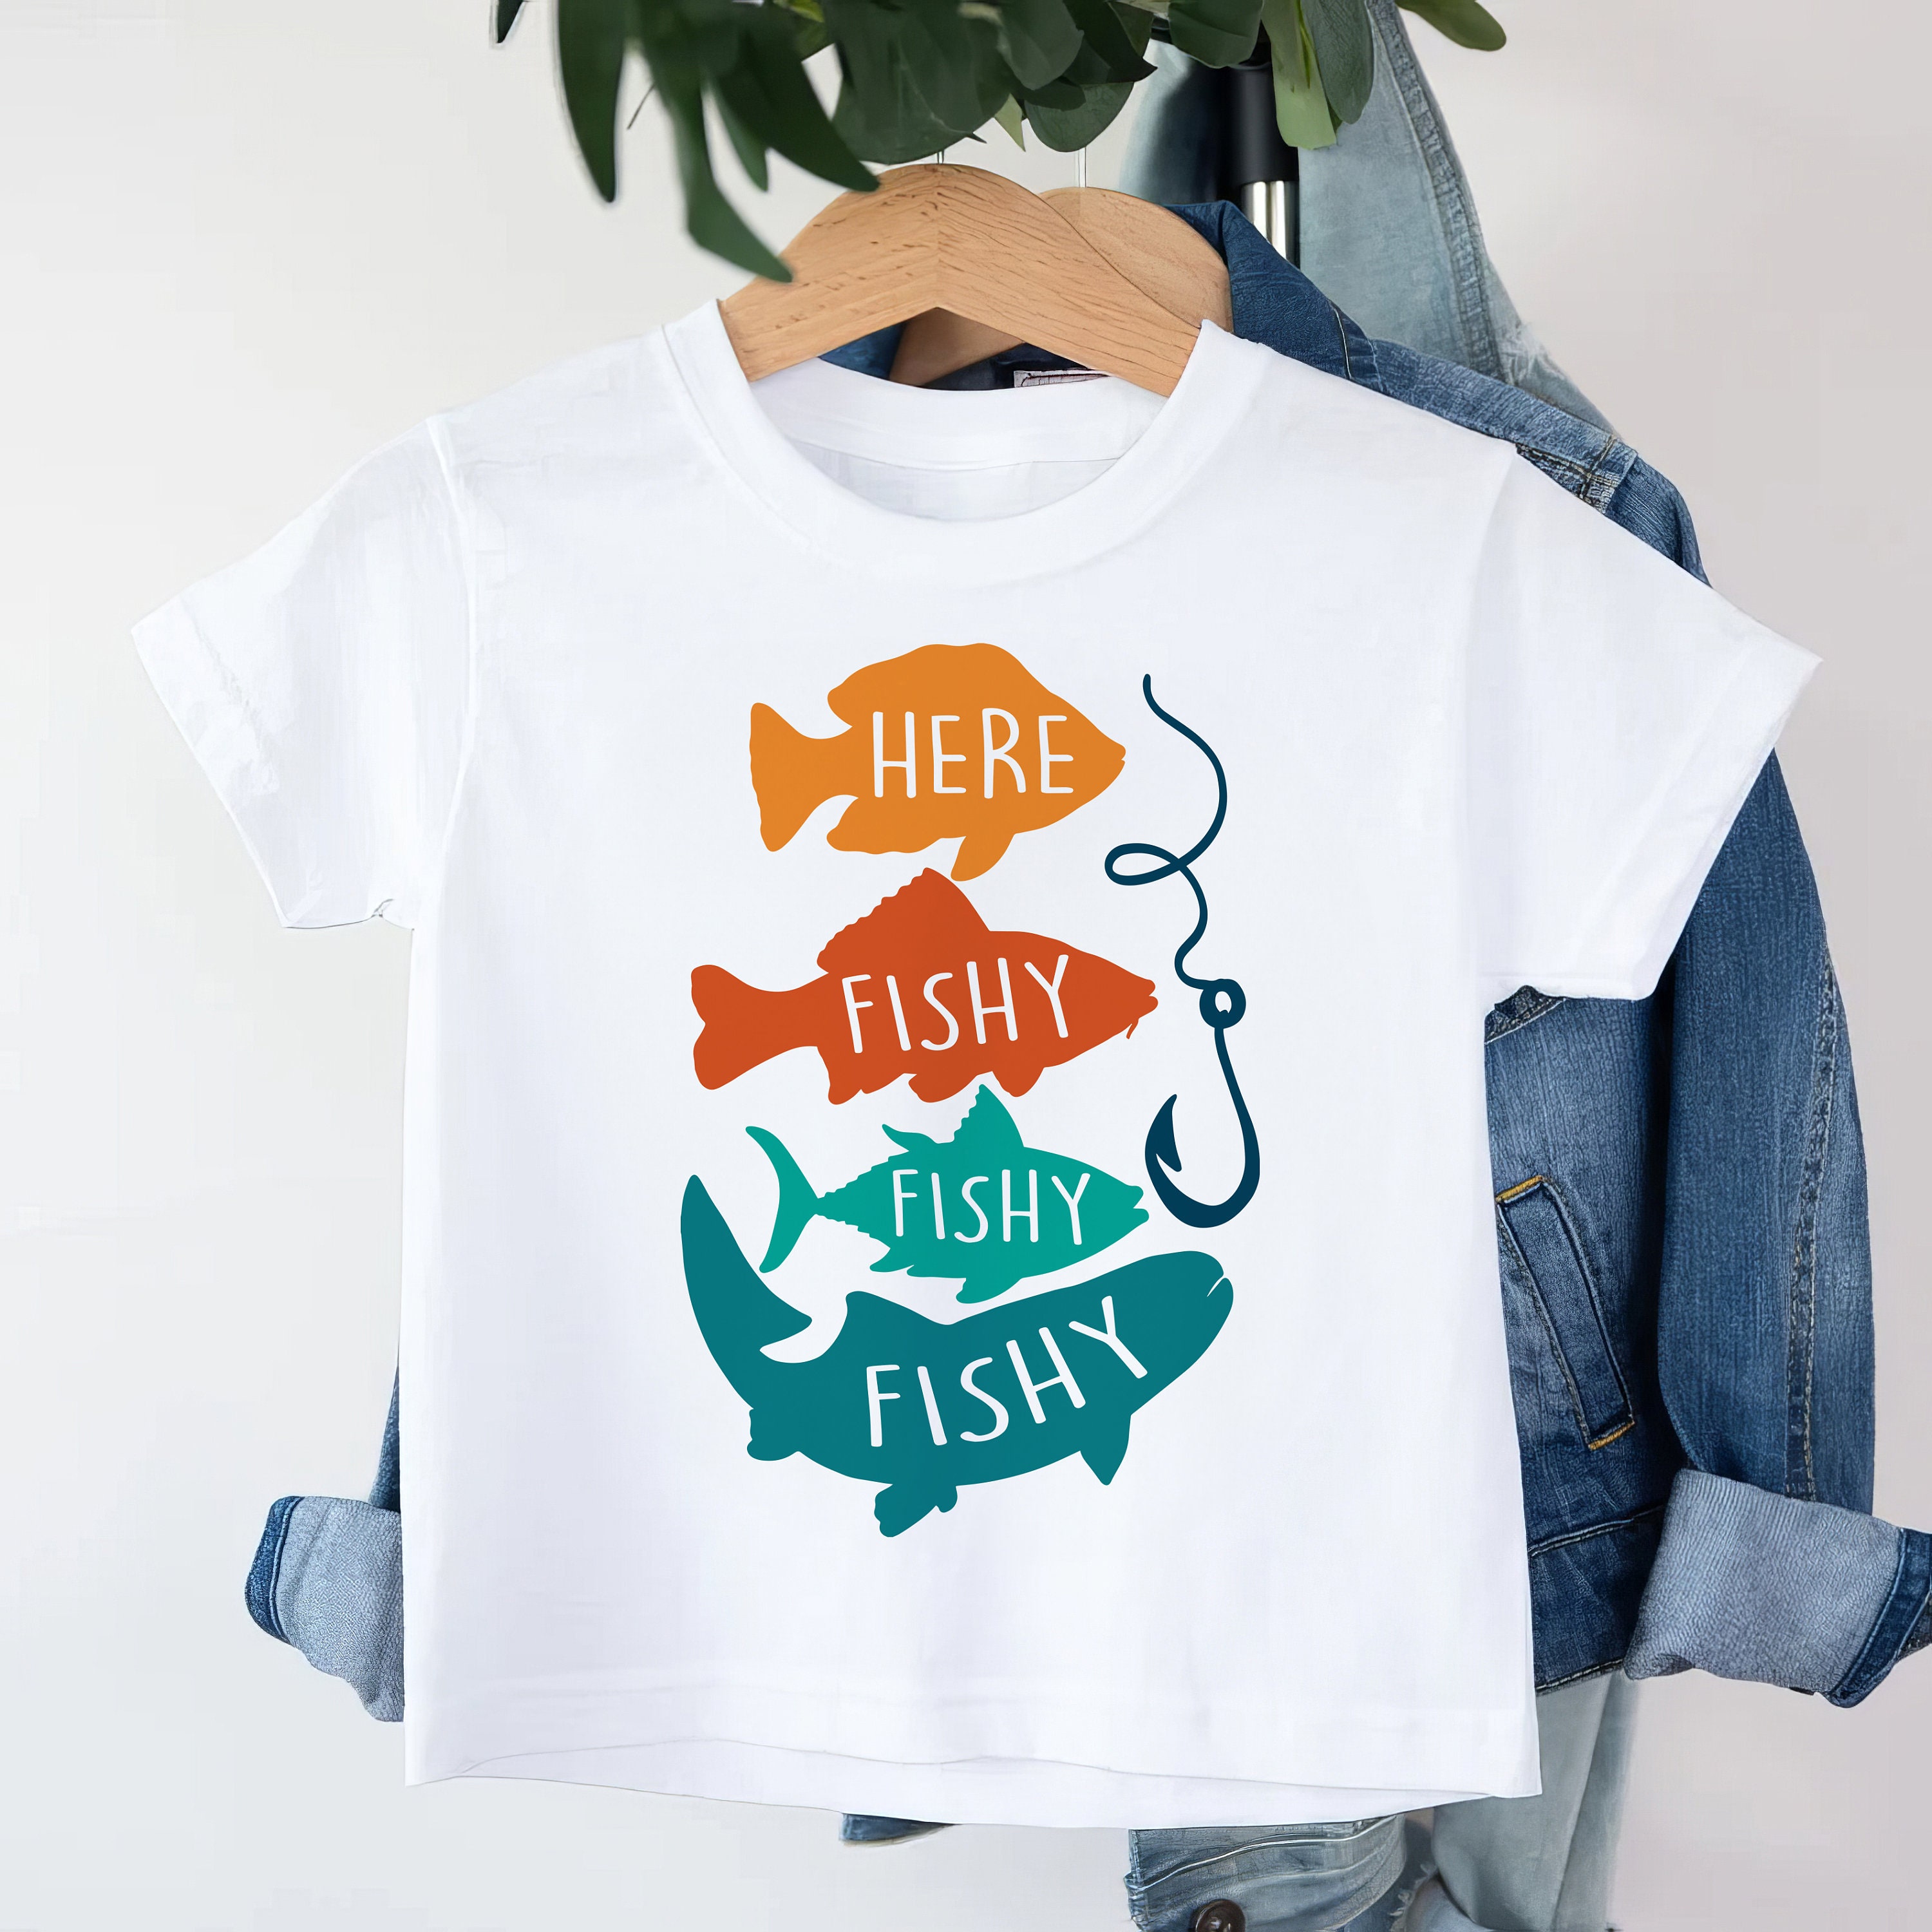 Fly Fishing Shirt - Boys and Girls Clothing - Baby, Toddler, Youth Graphic Tee - Fishing Gift - Boys Fly Fishing Tshirt - Baby Fishing Shirt